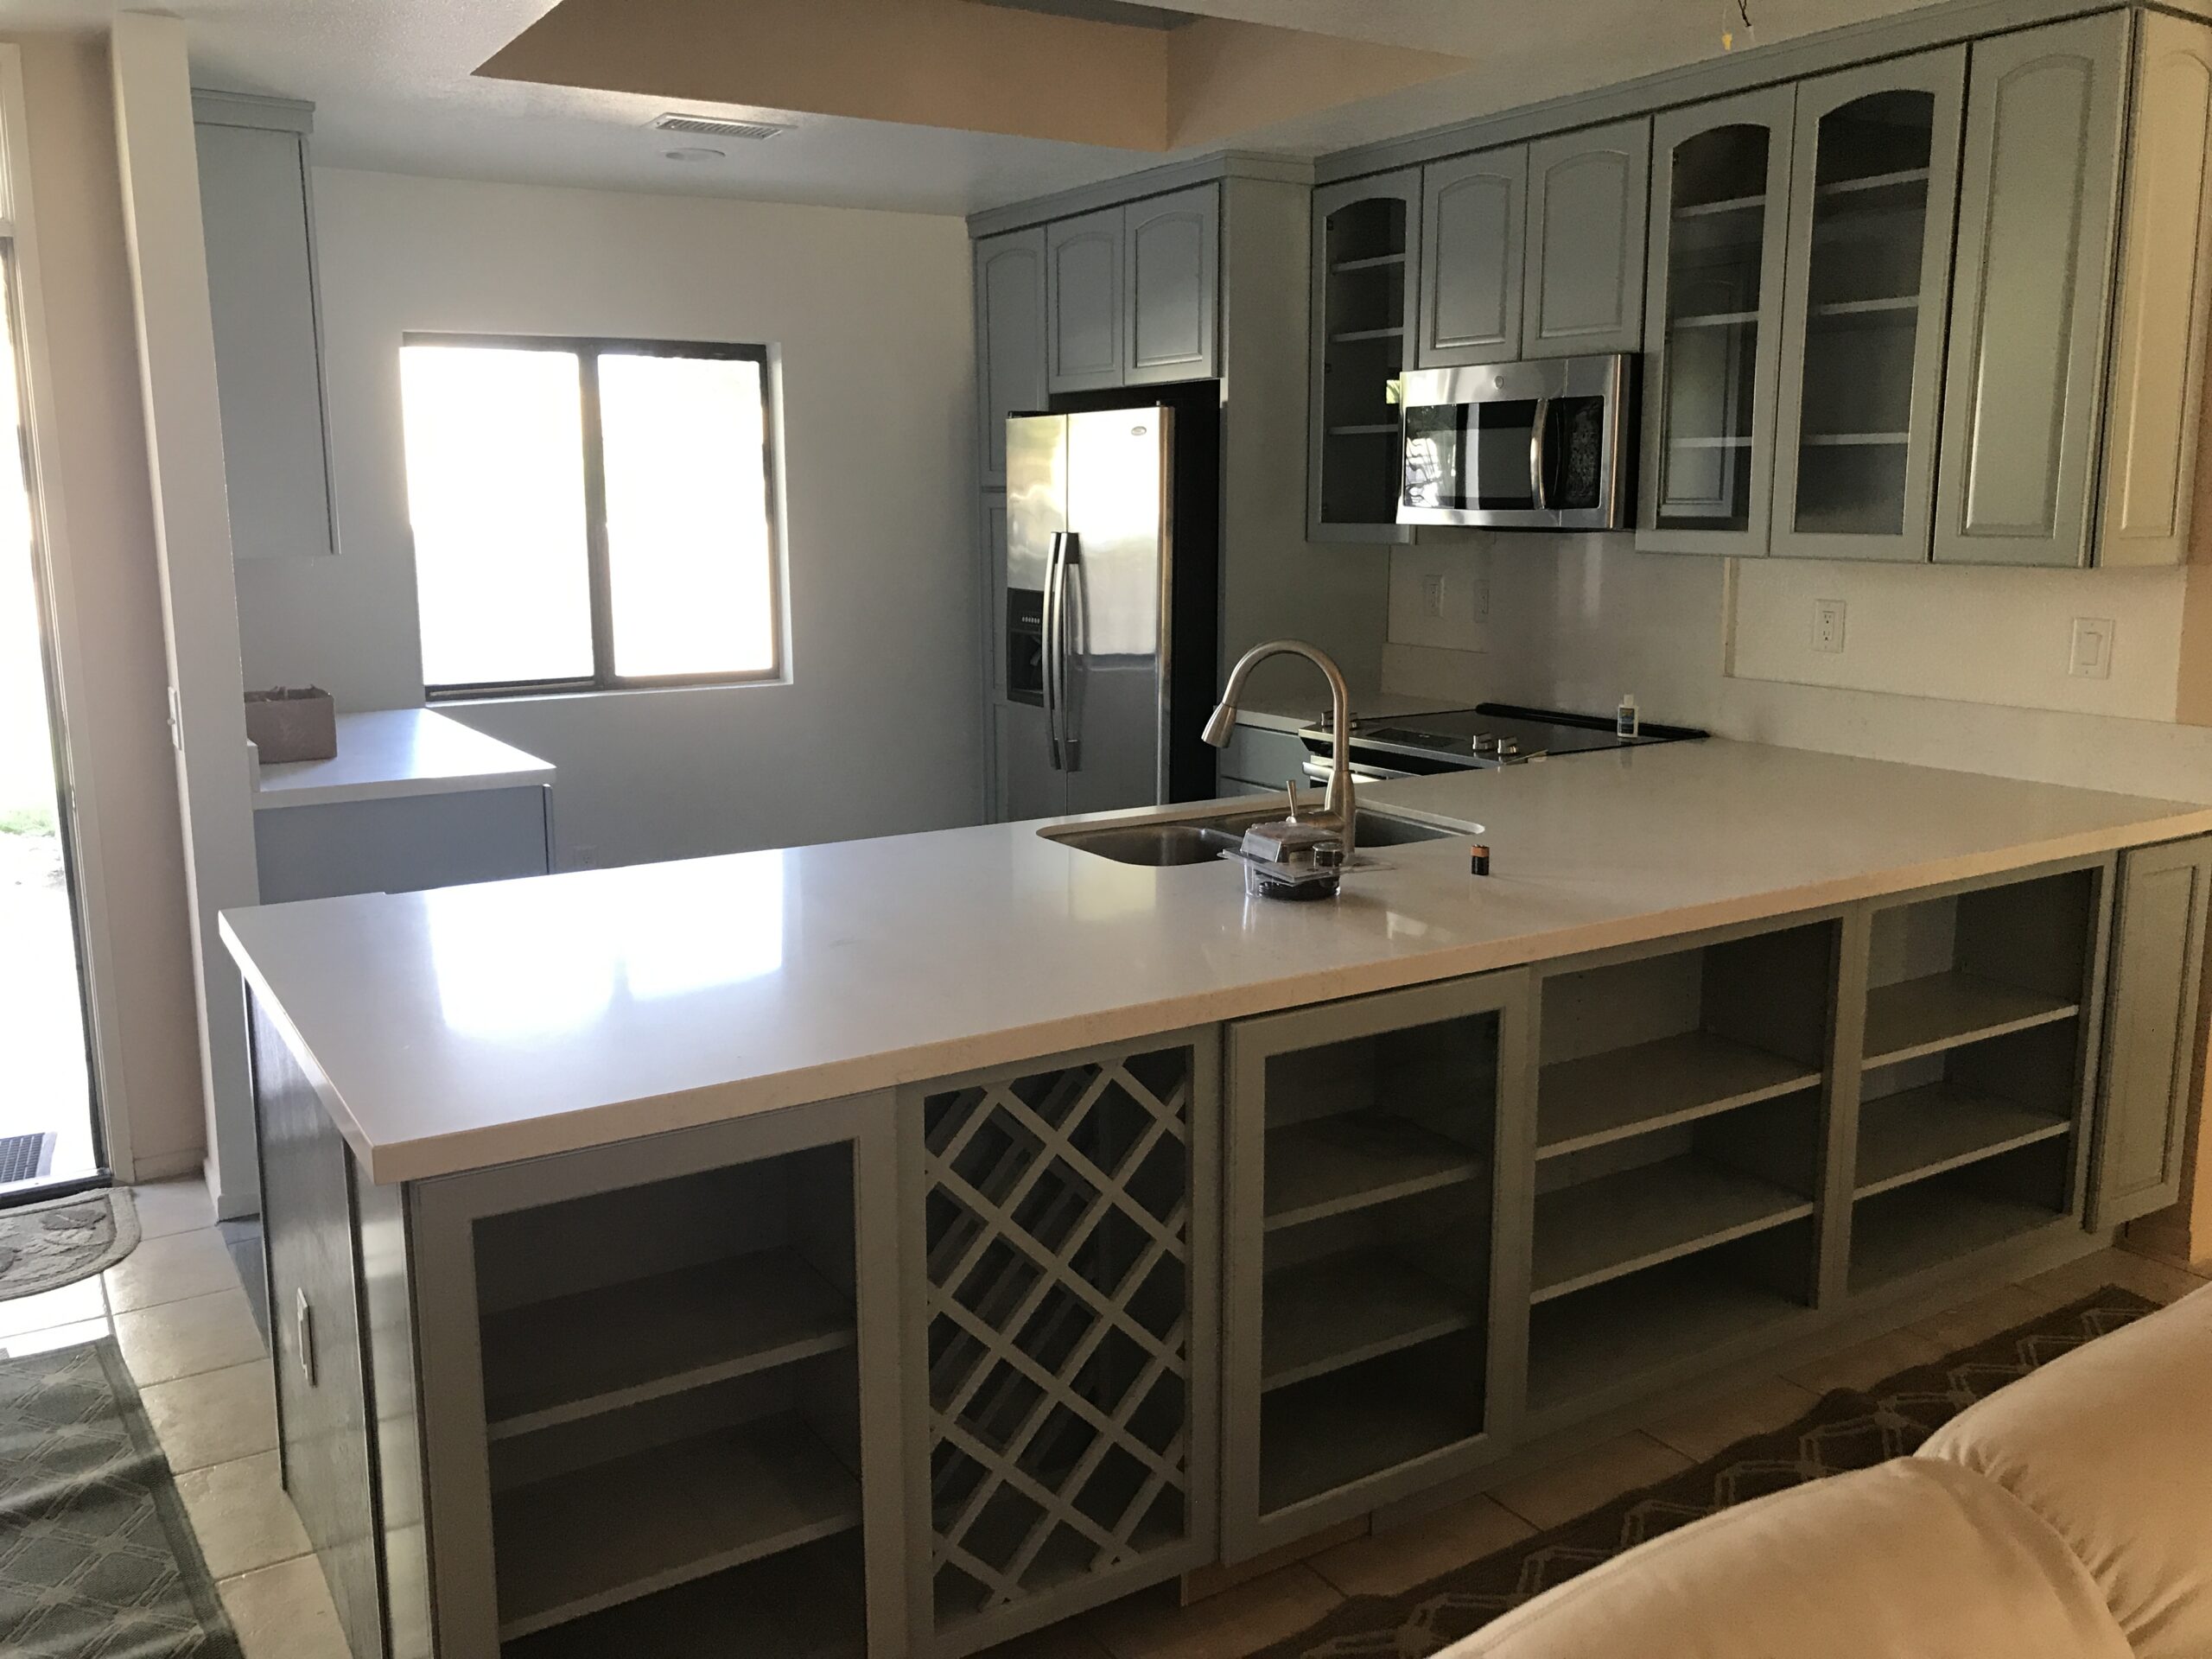 A wide picture of a kitchen, with a sink in the center.